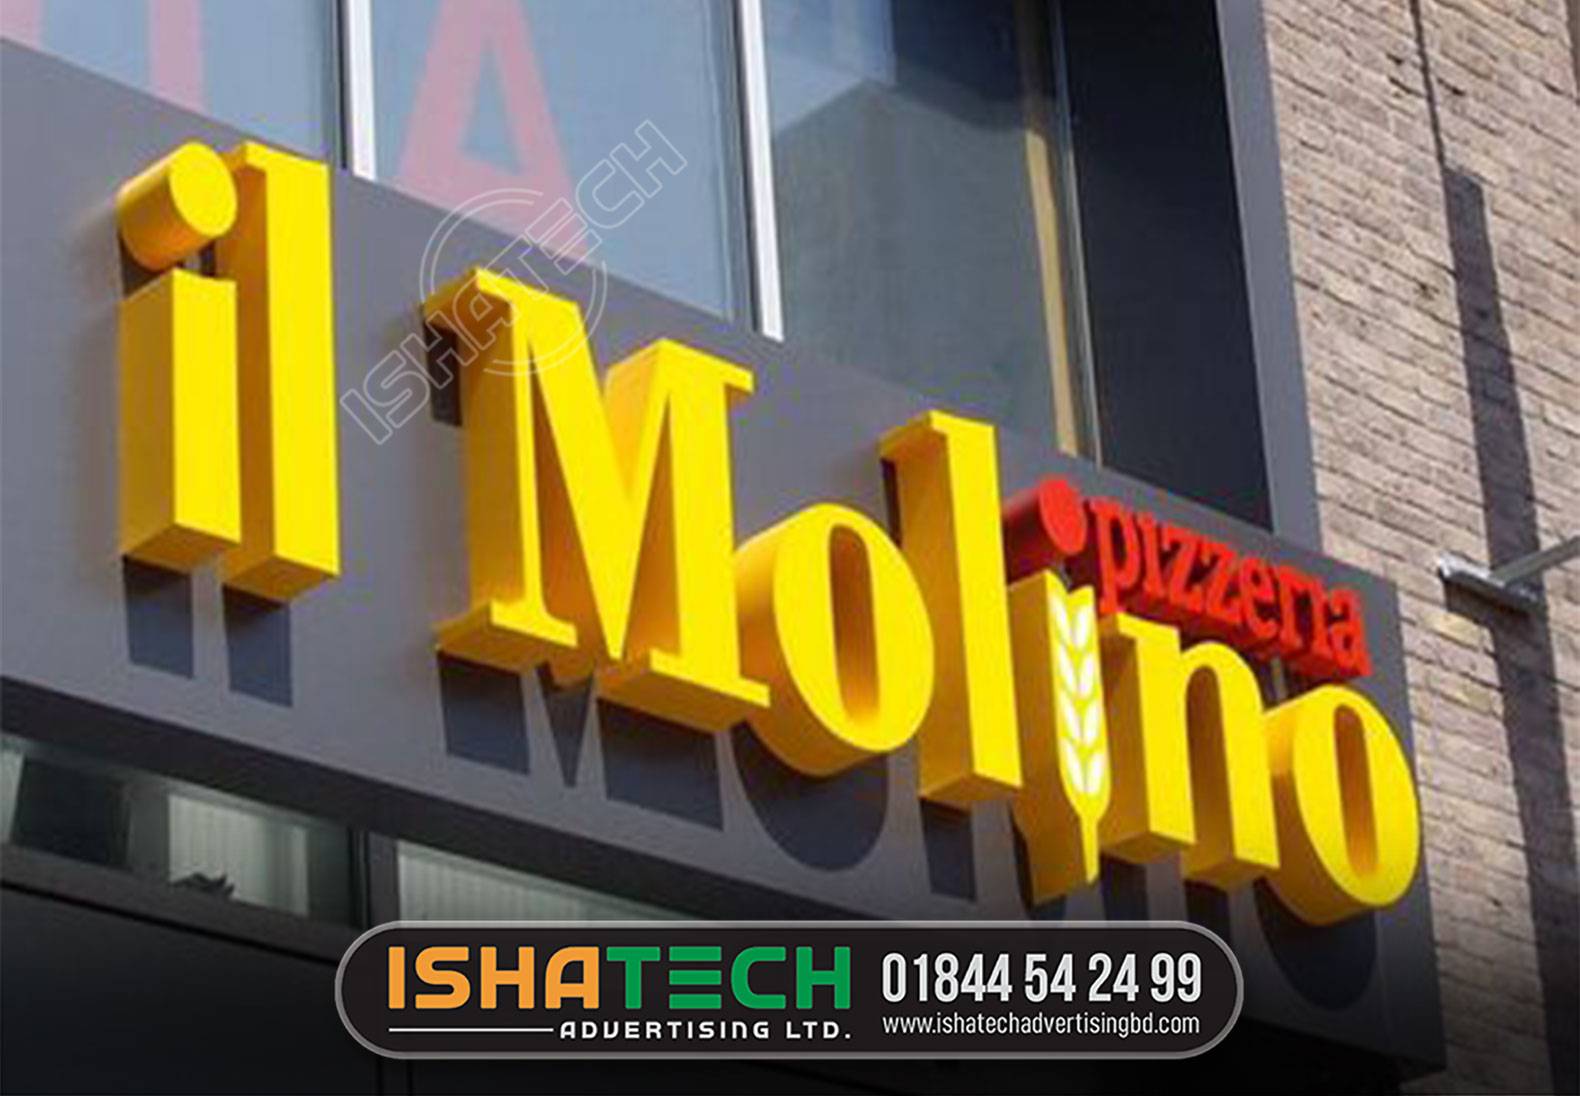 IL MOLINO PIZZERA SHOPPING MALL OUTDOOR GATE SIGNS BD, BEST LETTER SIGNAGE MAKER BD